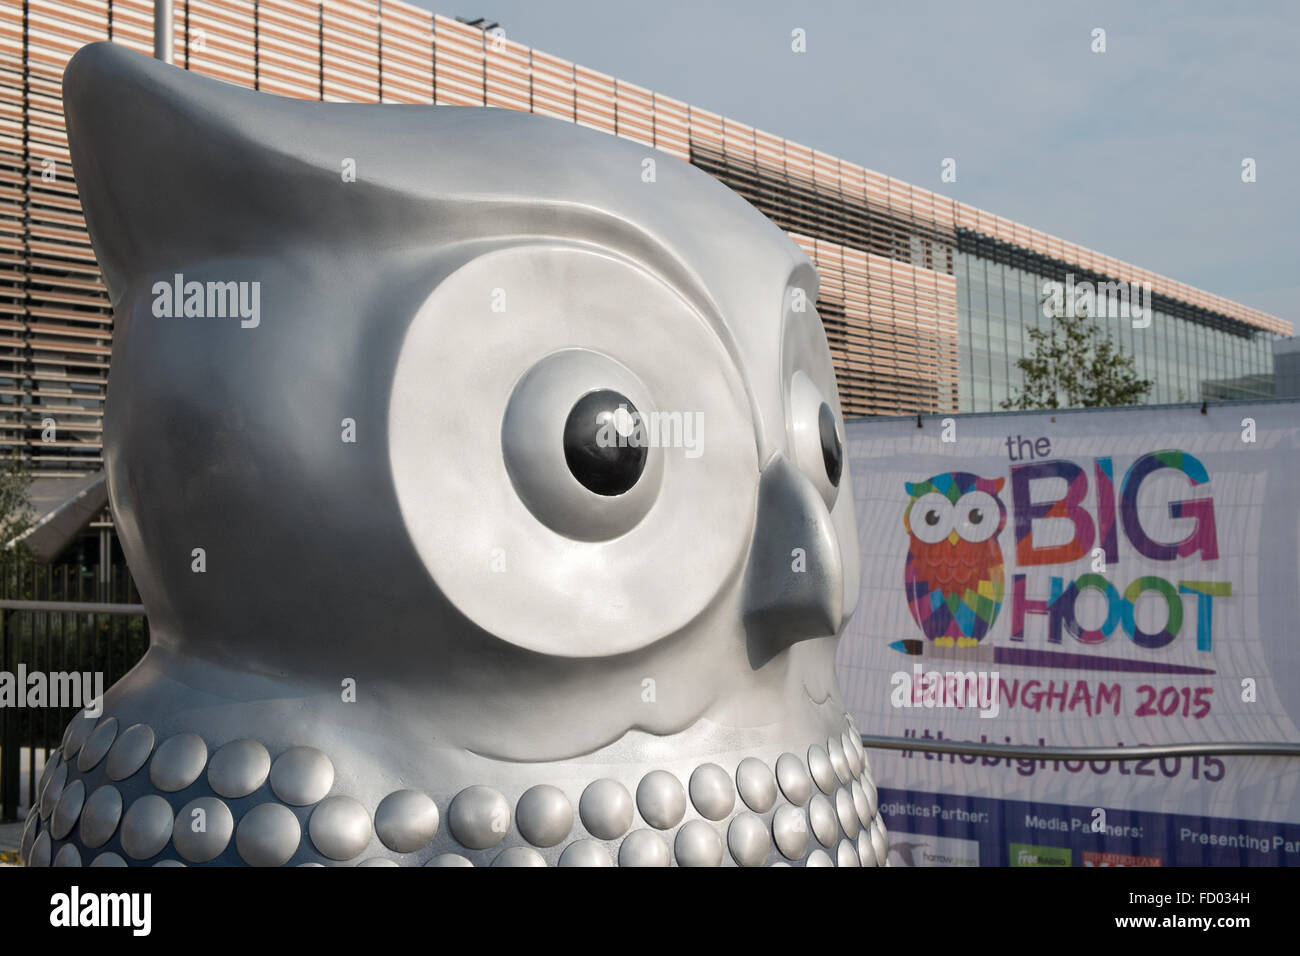 A silver painted owl made to look like the exterior of the Selfridges Store part of the Big Hoot Birmingham owl sculpture trail Stock Photo